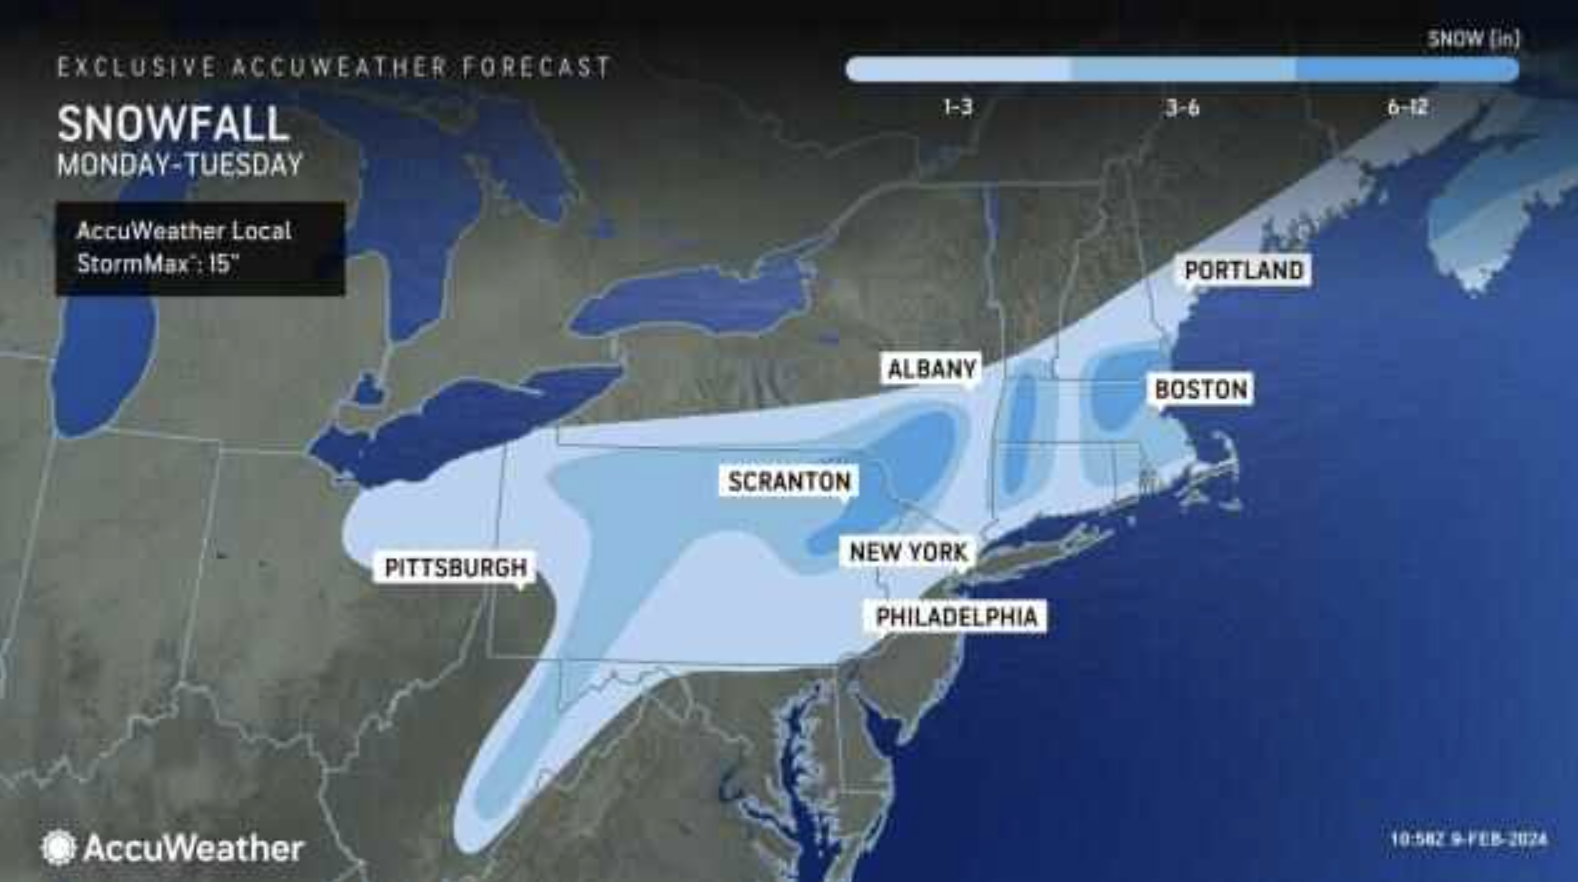 The preliminary snow forecast map for next week’s winter storm has been released